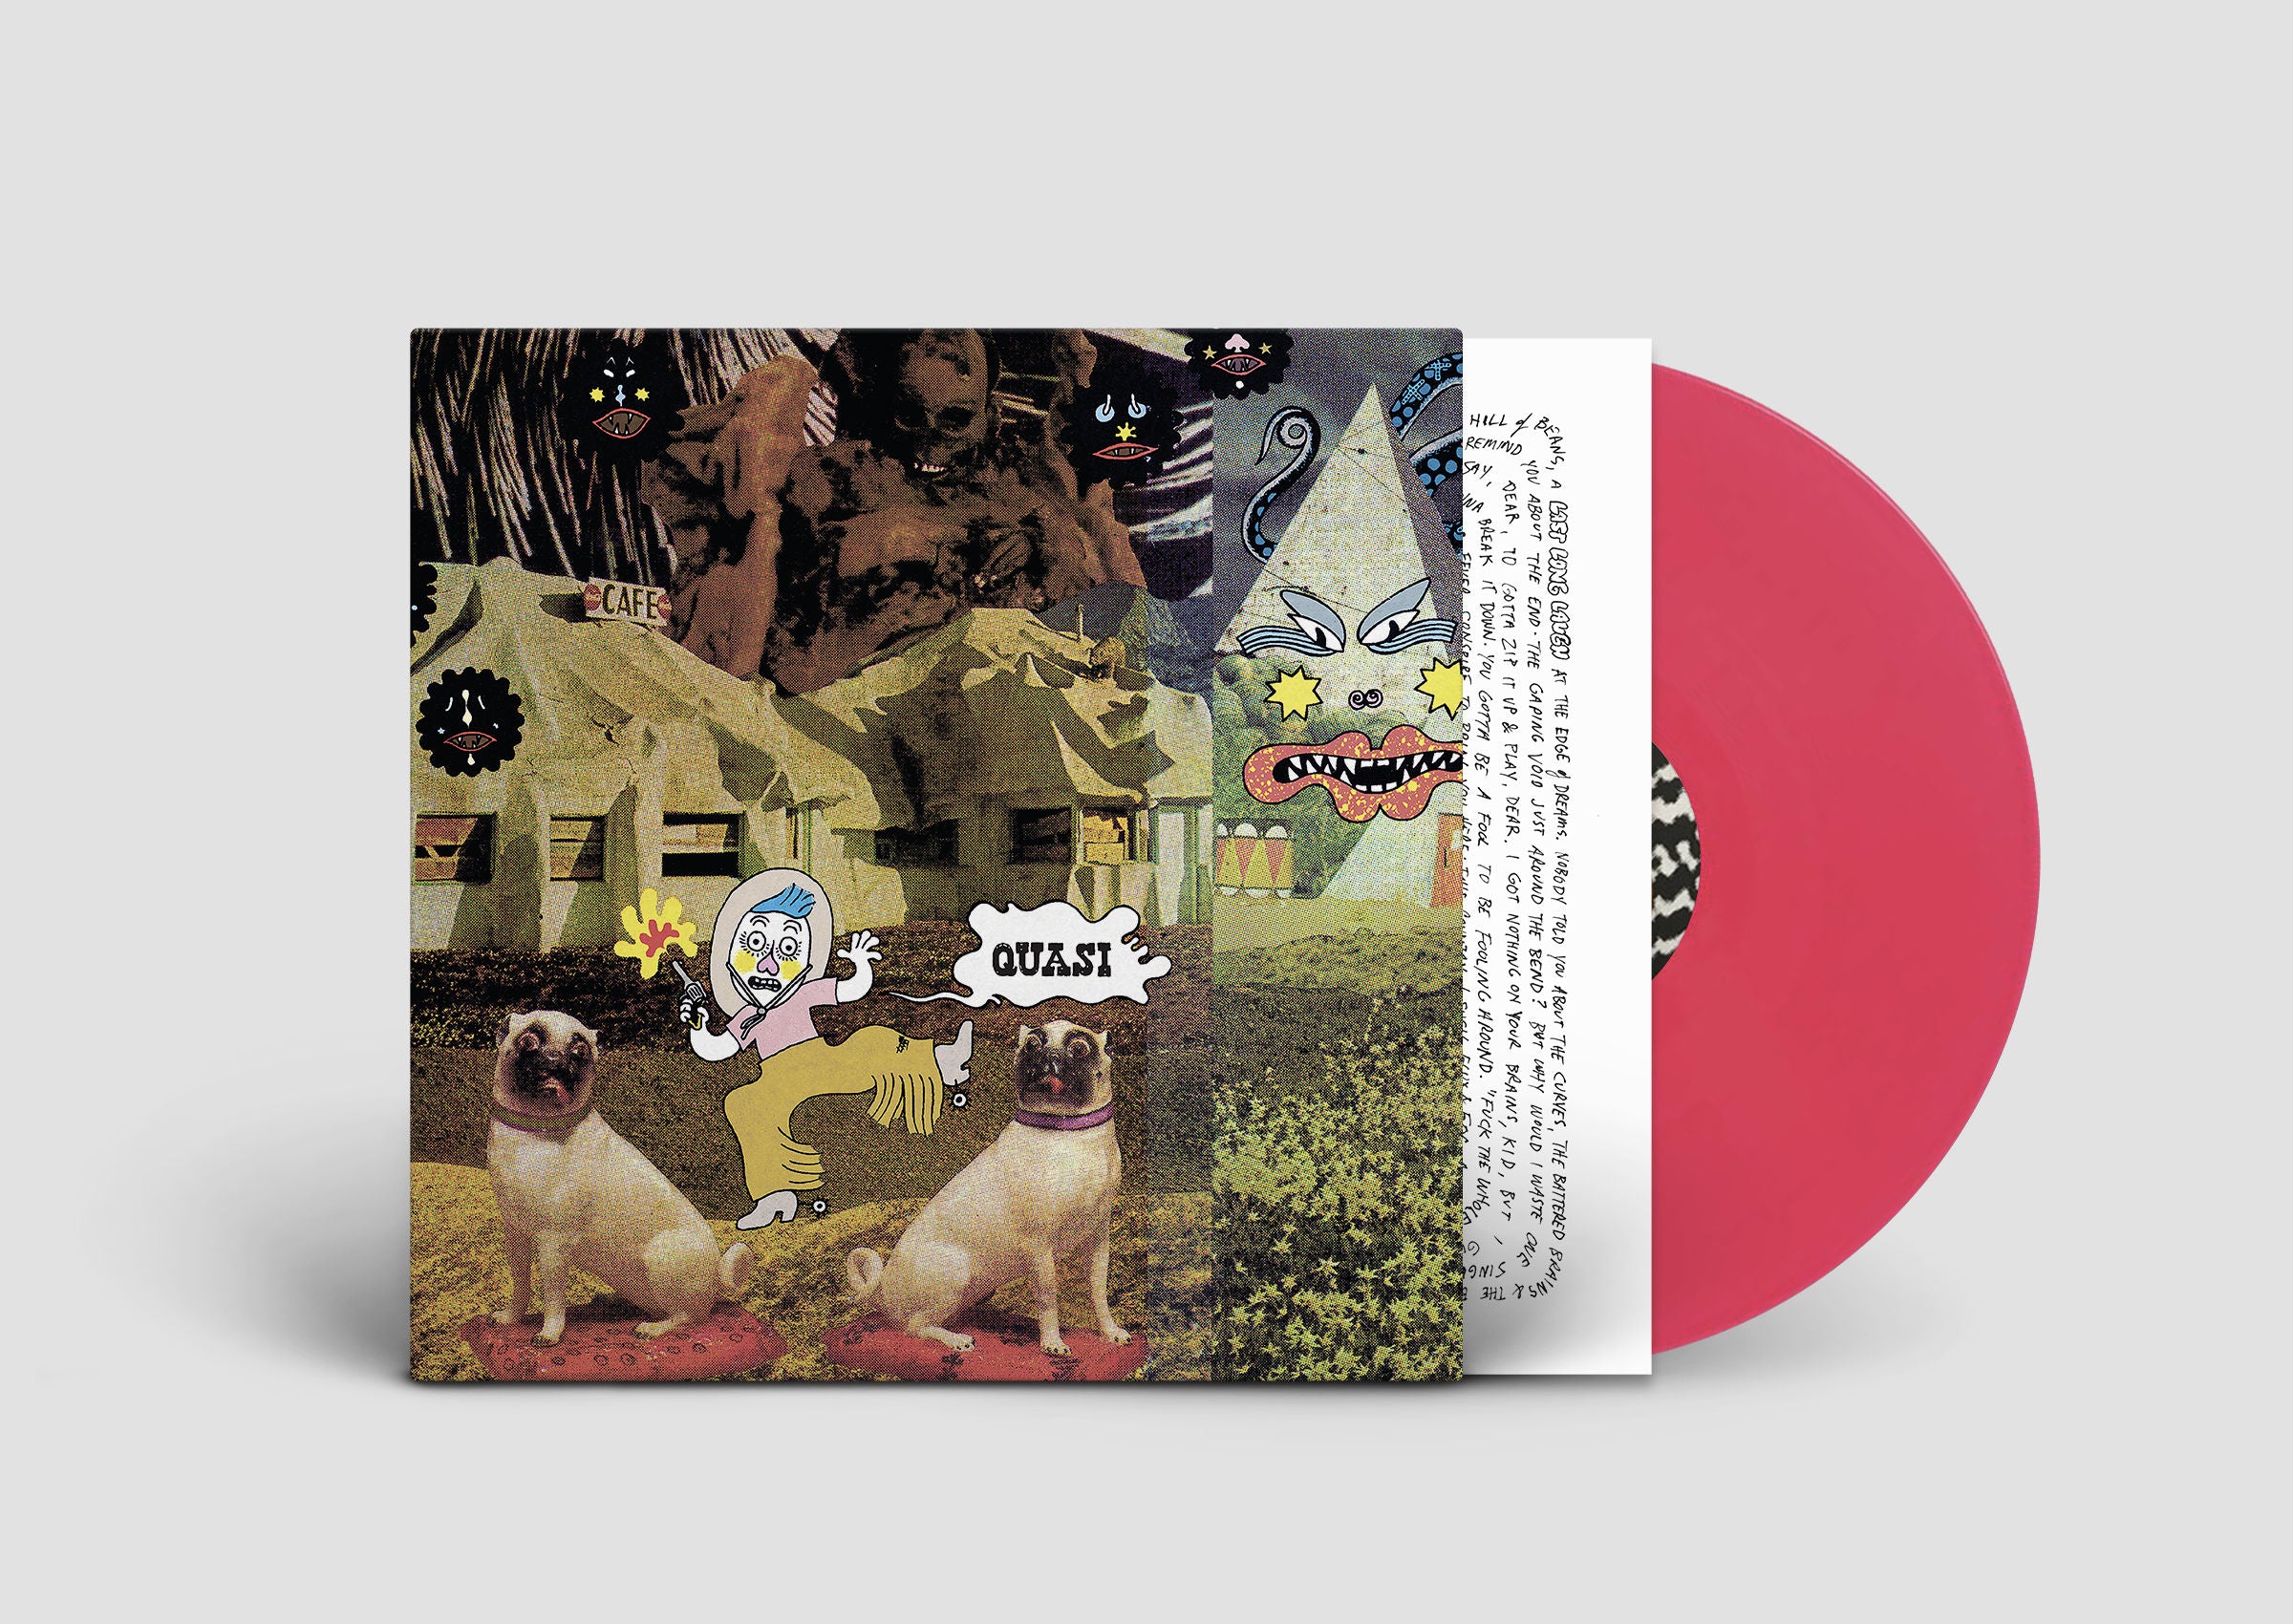 Breaking the Balls of History: Limited Loser Pink Vinyl LP